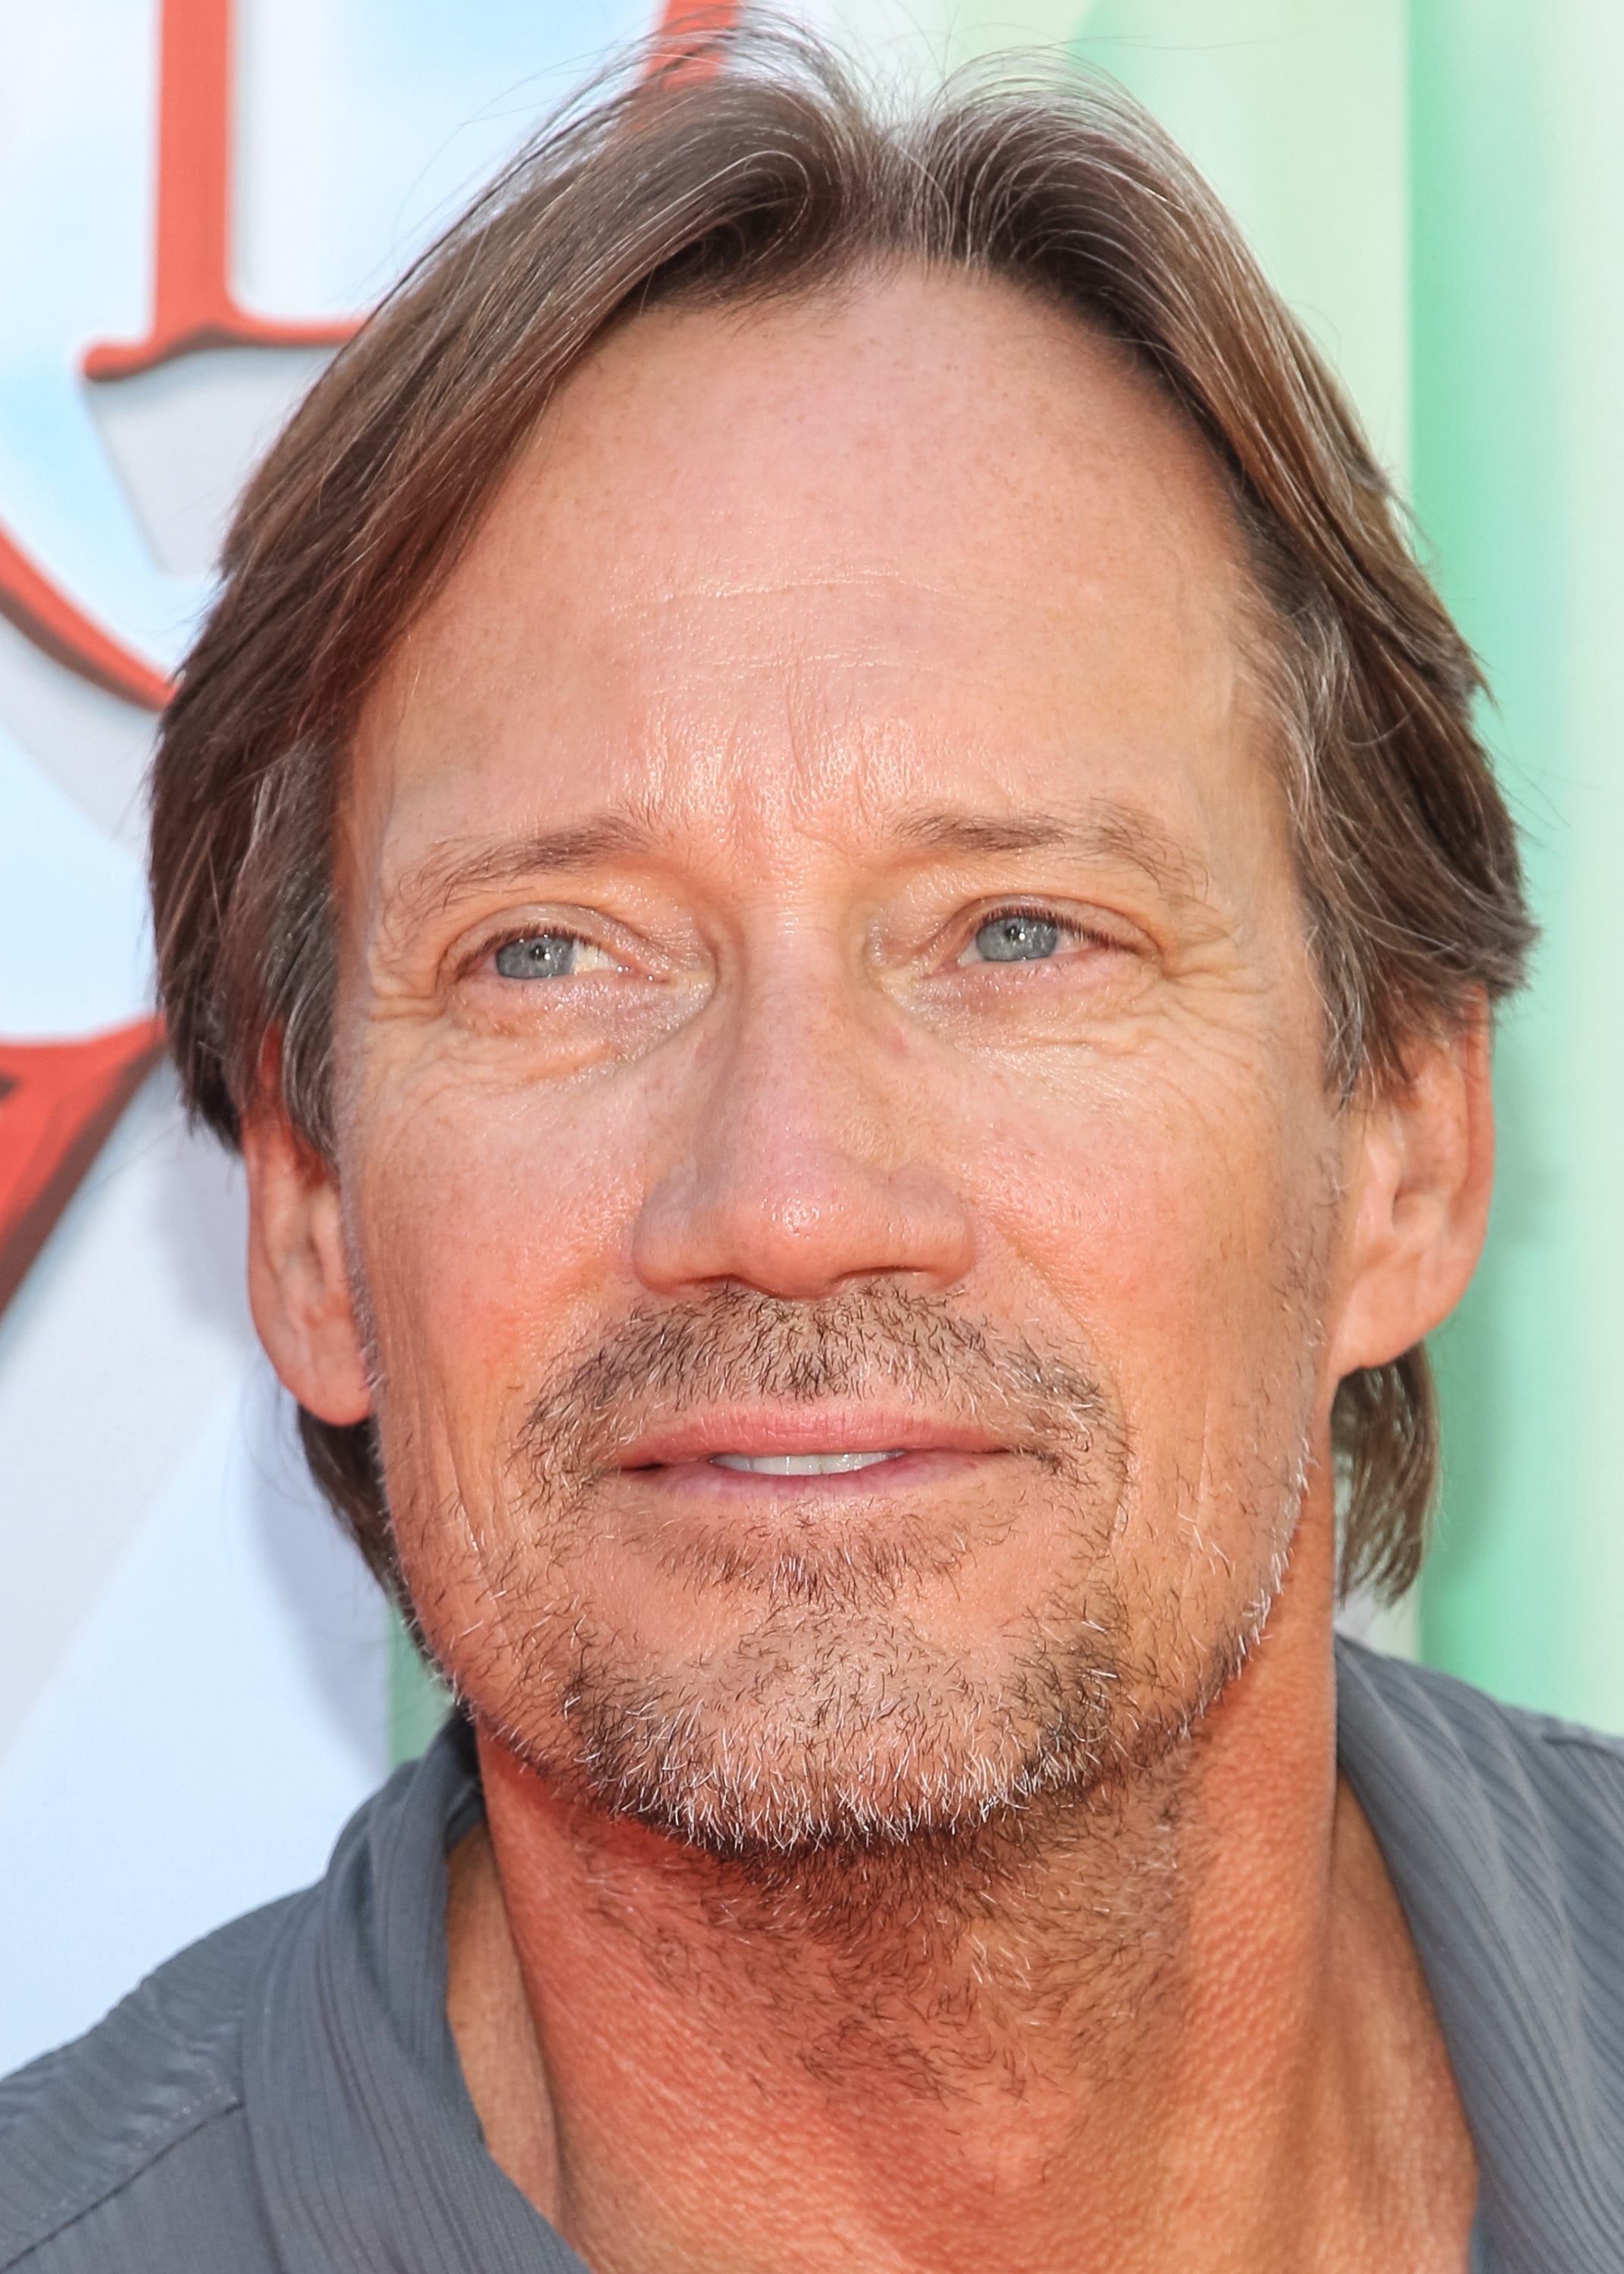 Kevin Sorbo: Oklahoma City adoption agency fundraiser, Deaconess Pregnancy and Adoption Services, Speech in support of the foundation, Aug 13, 2015. 2150x3000 HD Wallpaper.